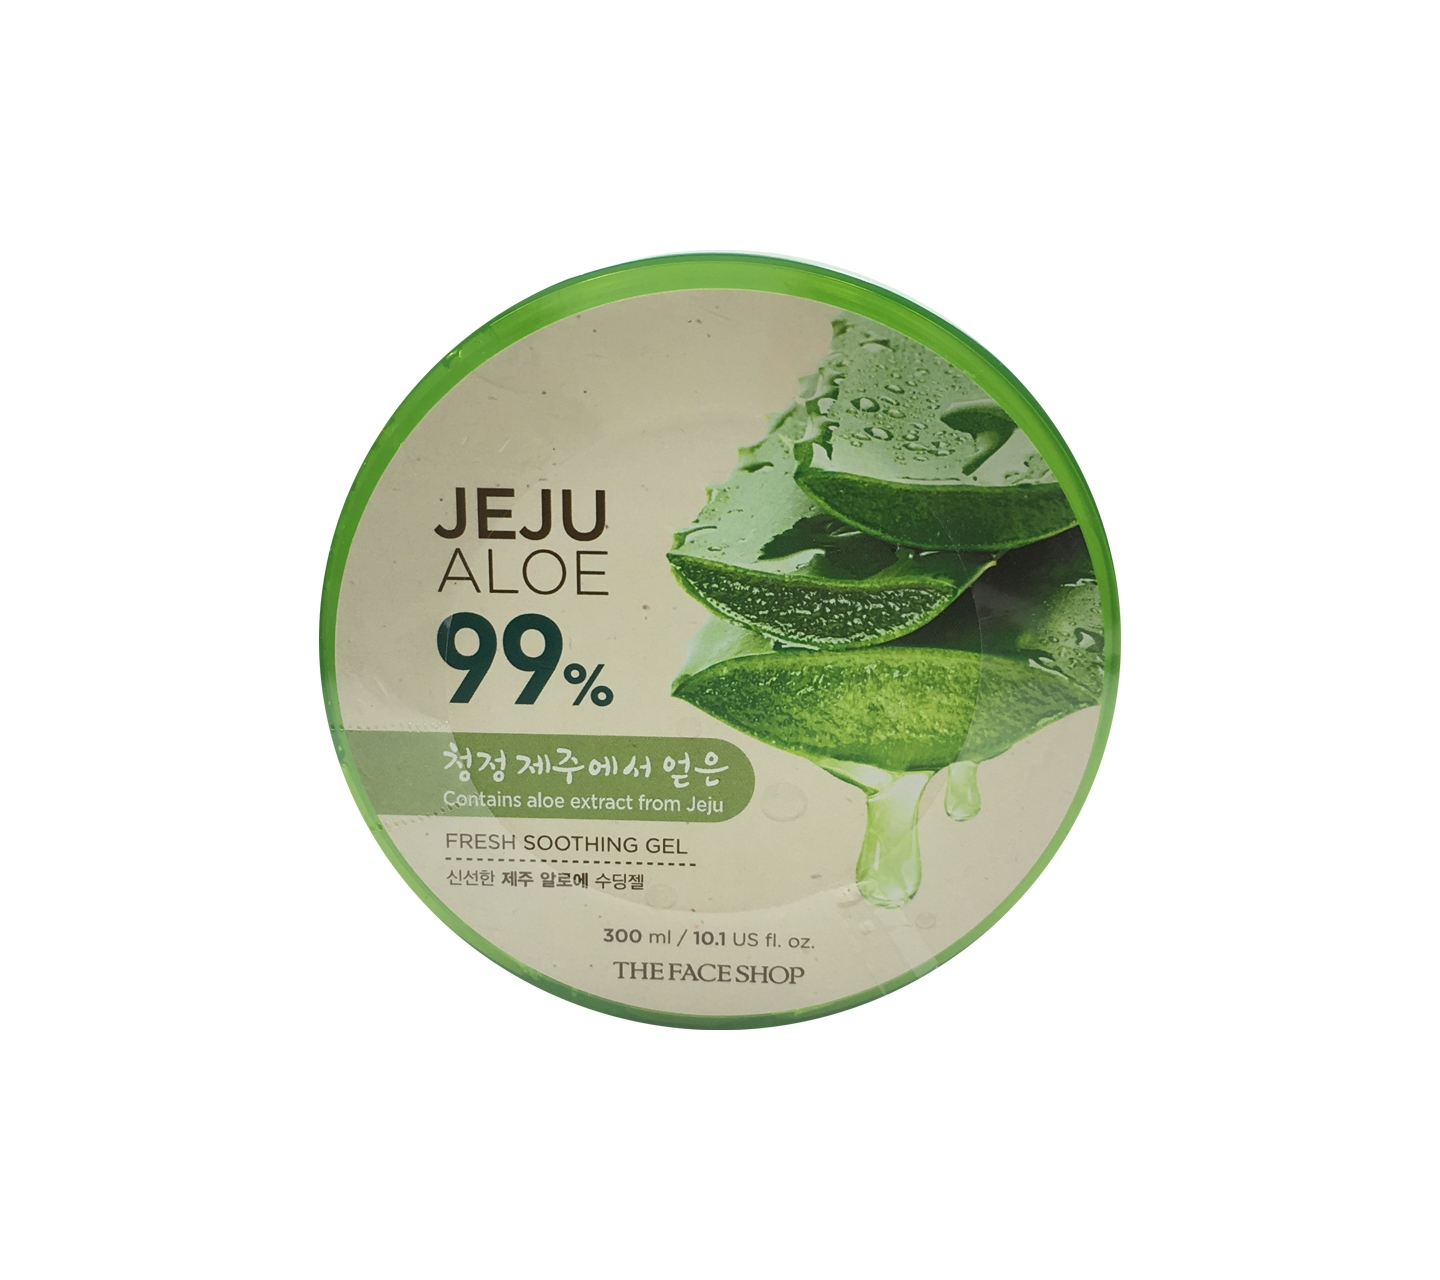 The face shop jeju aloe 99% fresh soothing gel